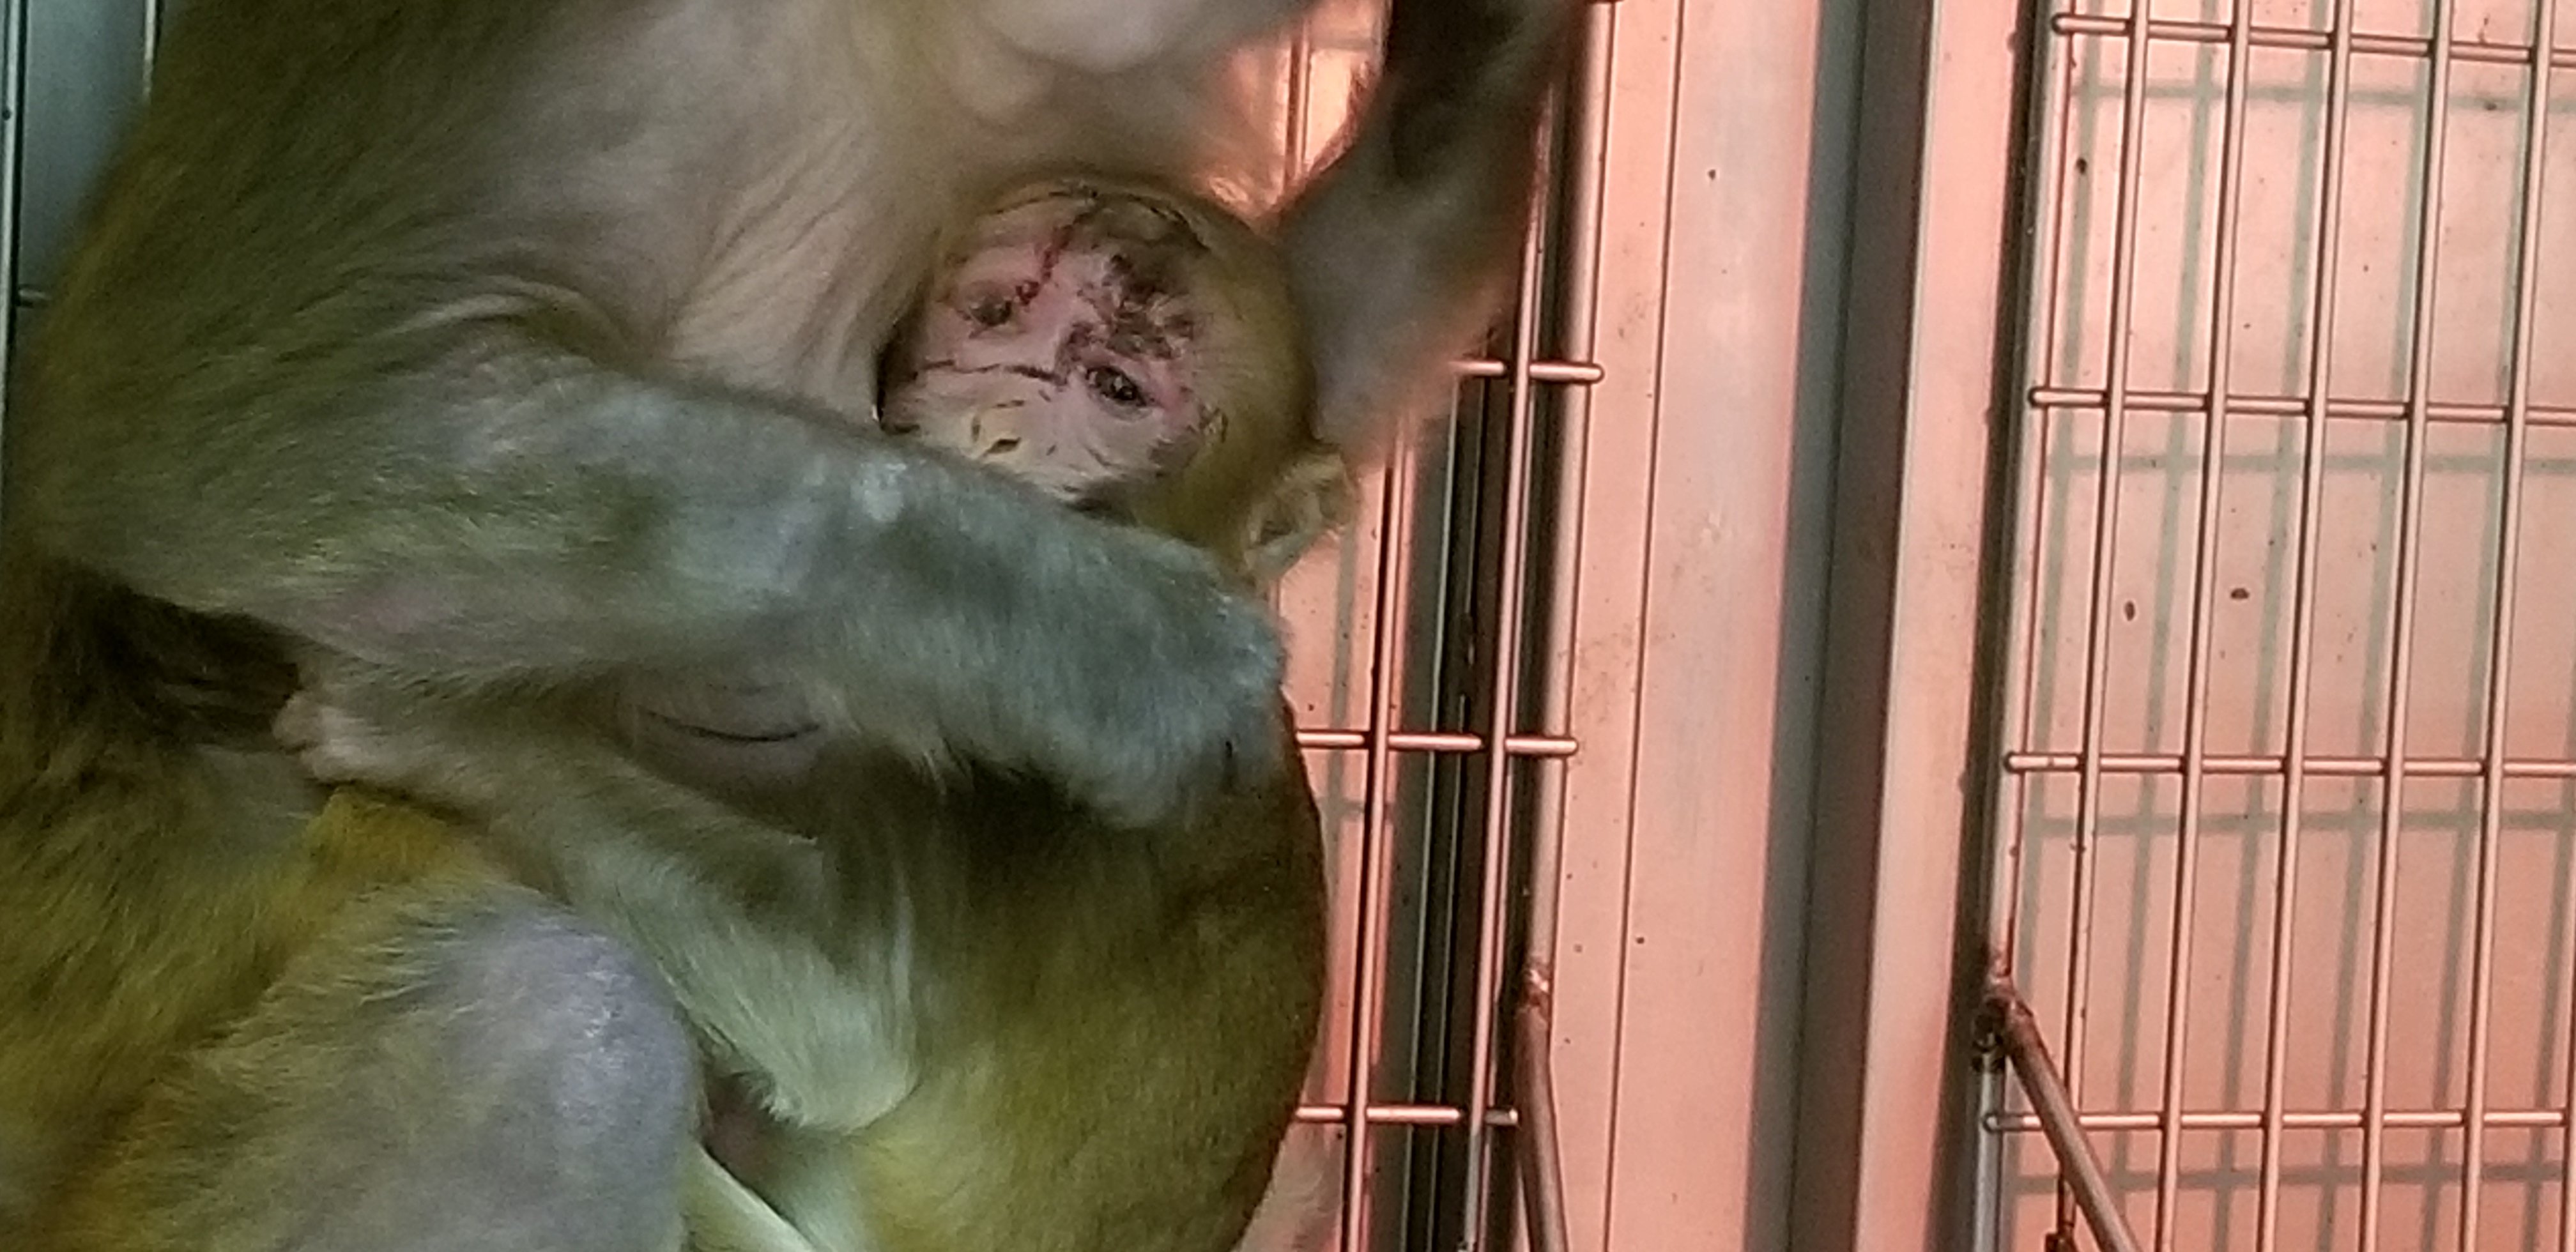 This baby monkey, Cocoa, was attacked by a severely stressed adult monkey, resulting in deep, painful cuts to her face.